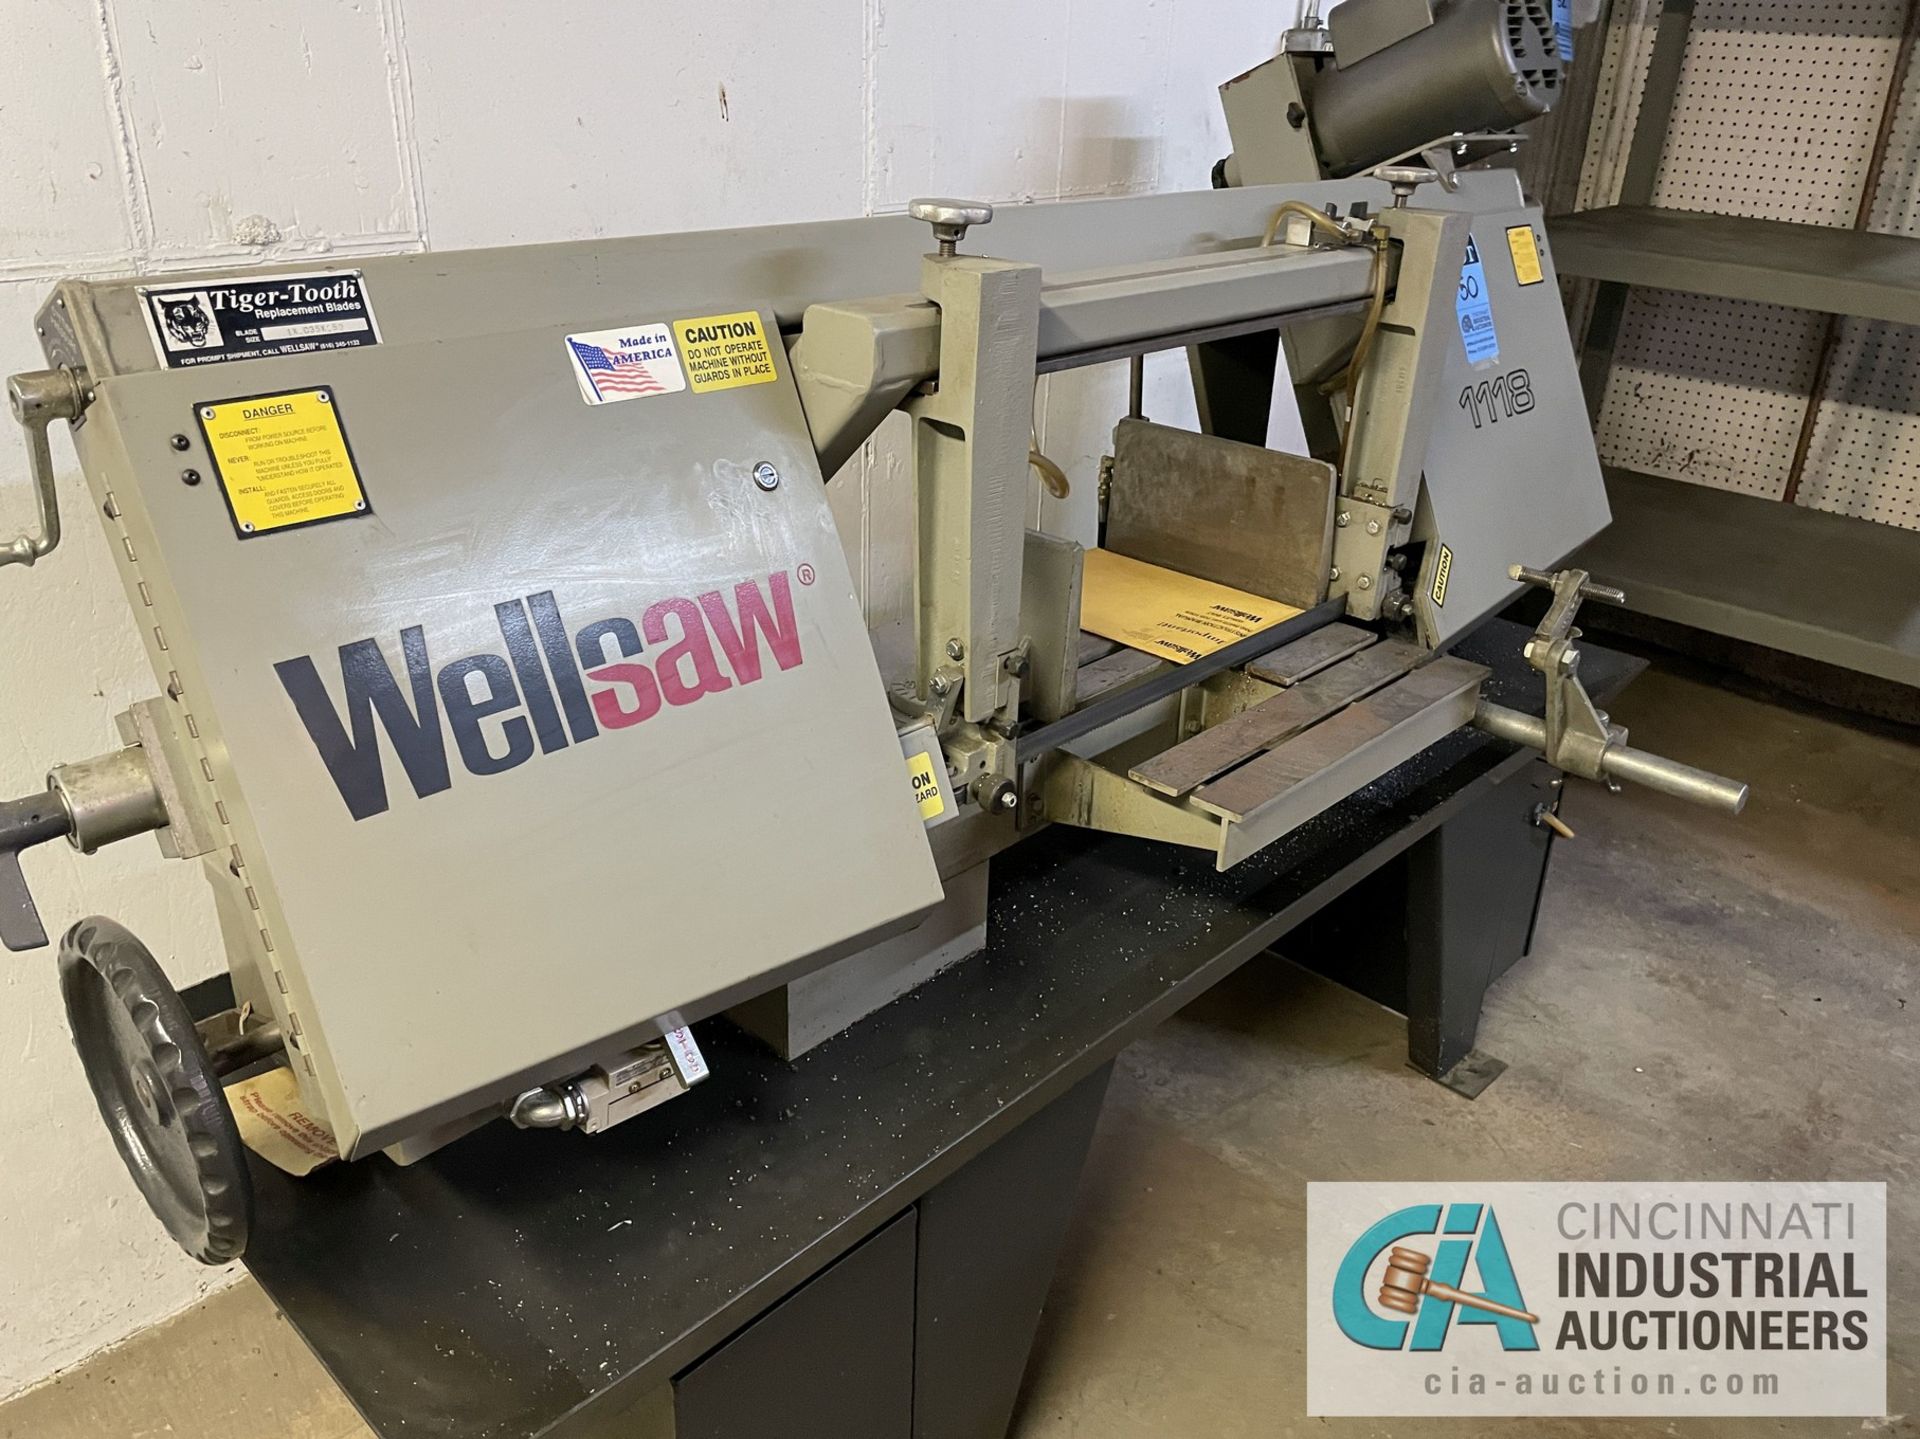 13" X 18" WELLSAW MODEL 1118 HORIZONTAL BAND SAW; S/N 3489, SINGLE PHASE, 115 VOLTS, 2 HP MOTOR - Image 3 of 12